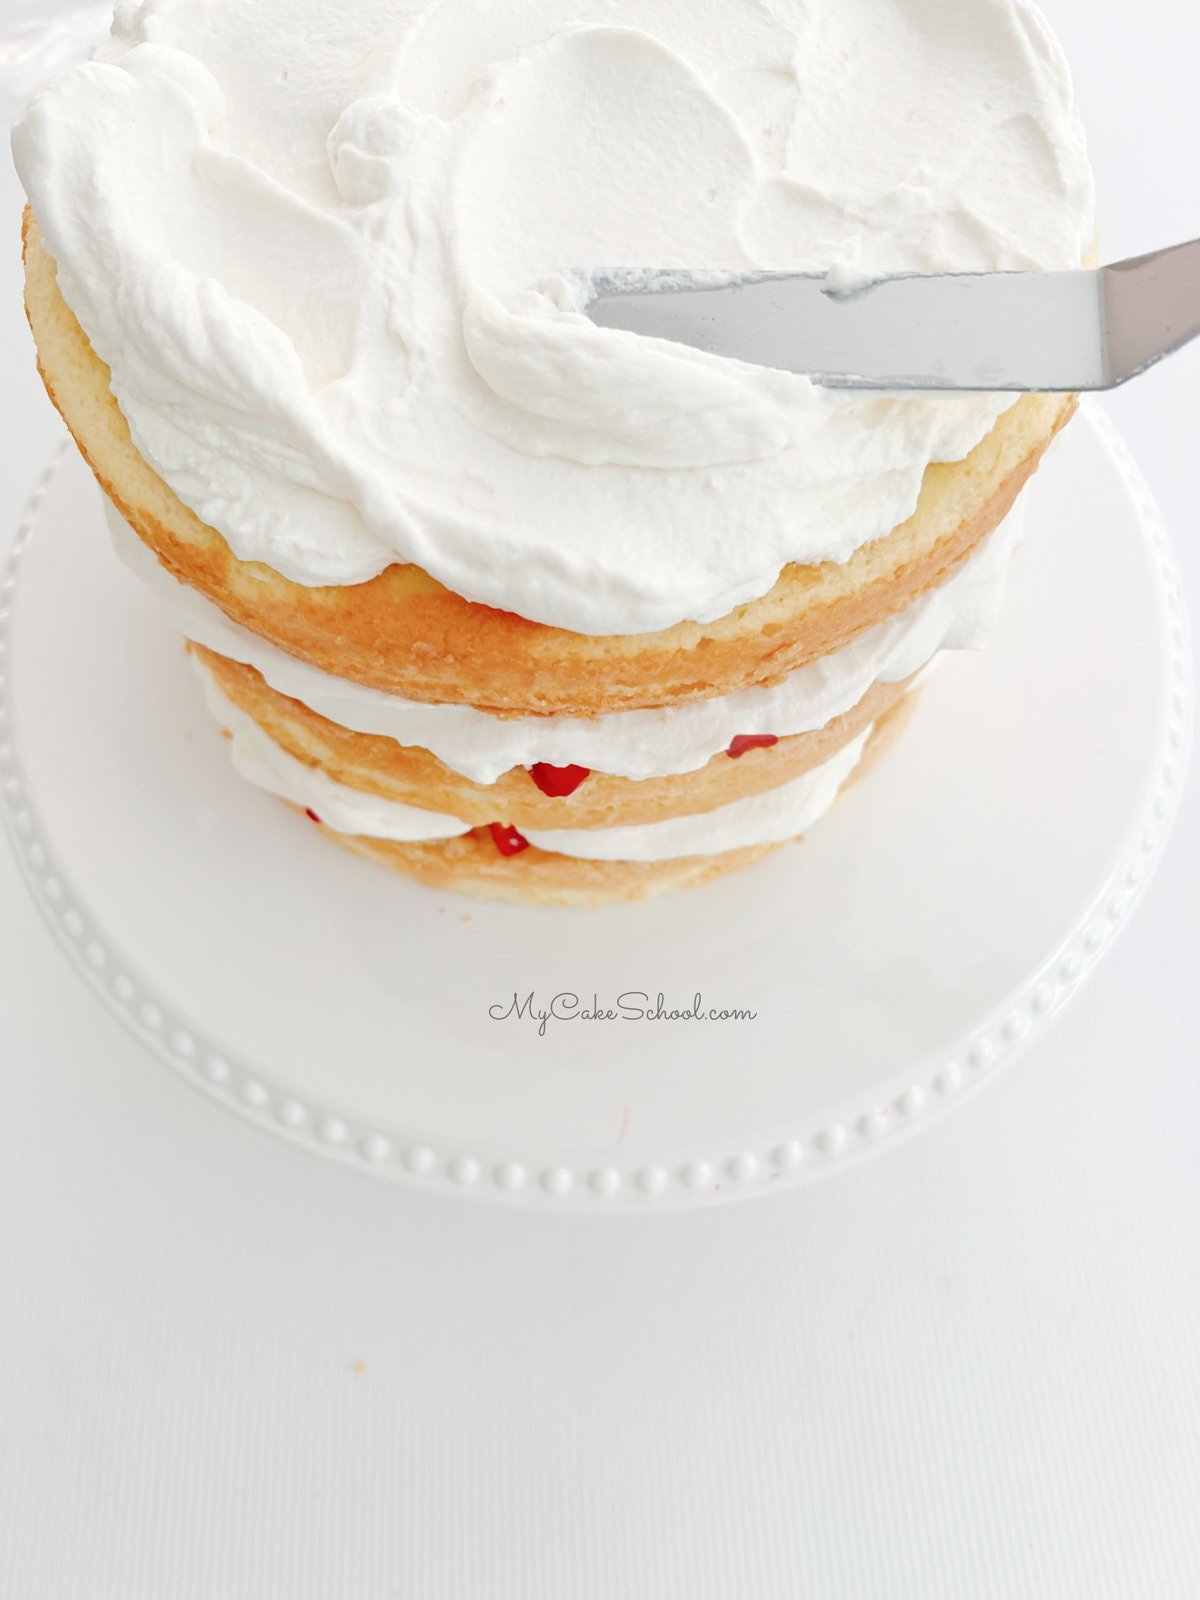 Topping the layered strawberry shortcake cake with whipped cream